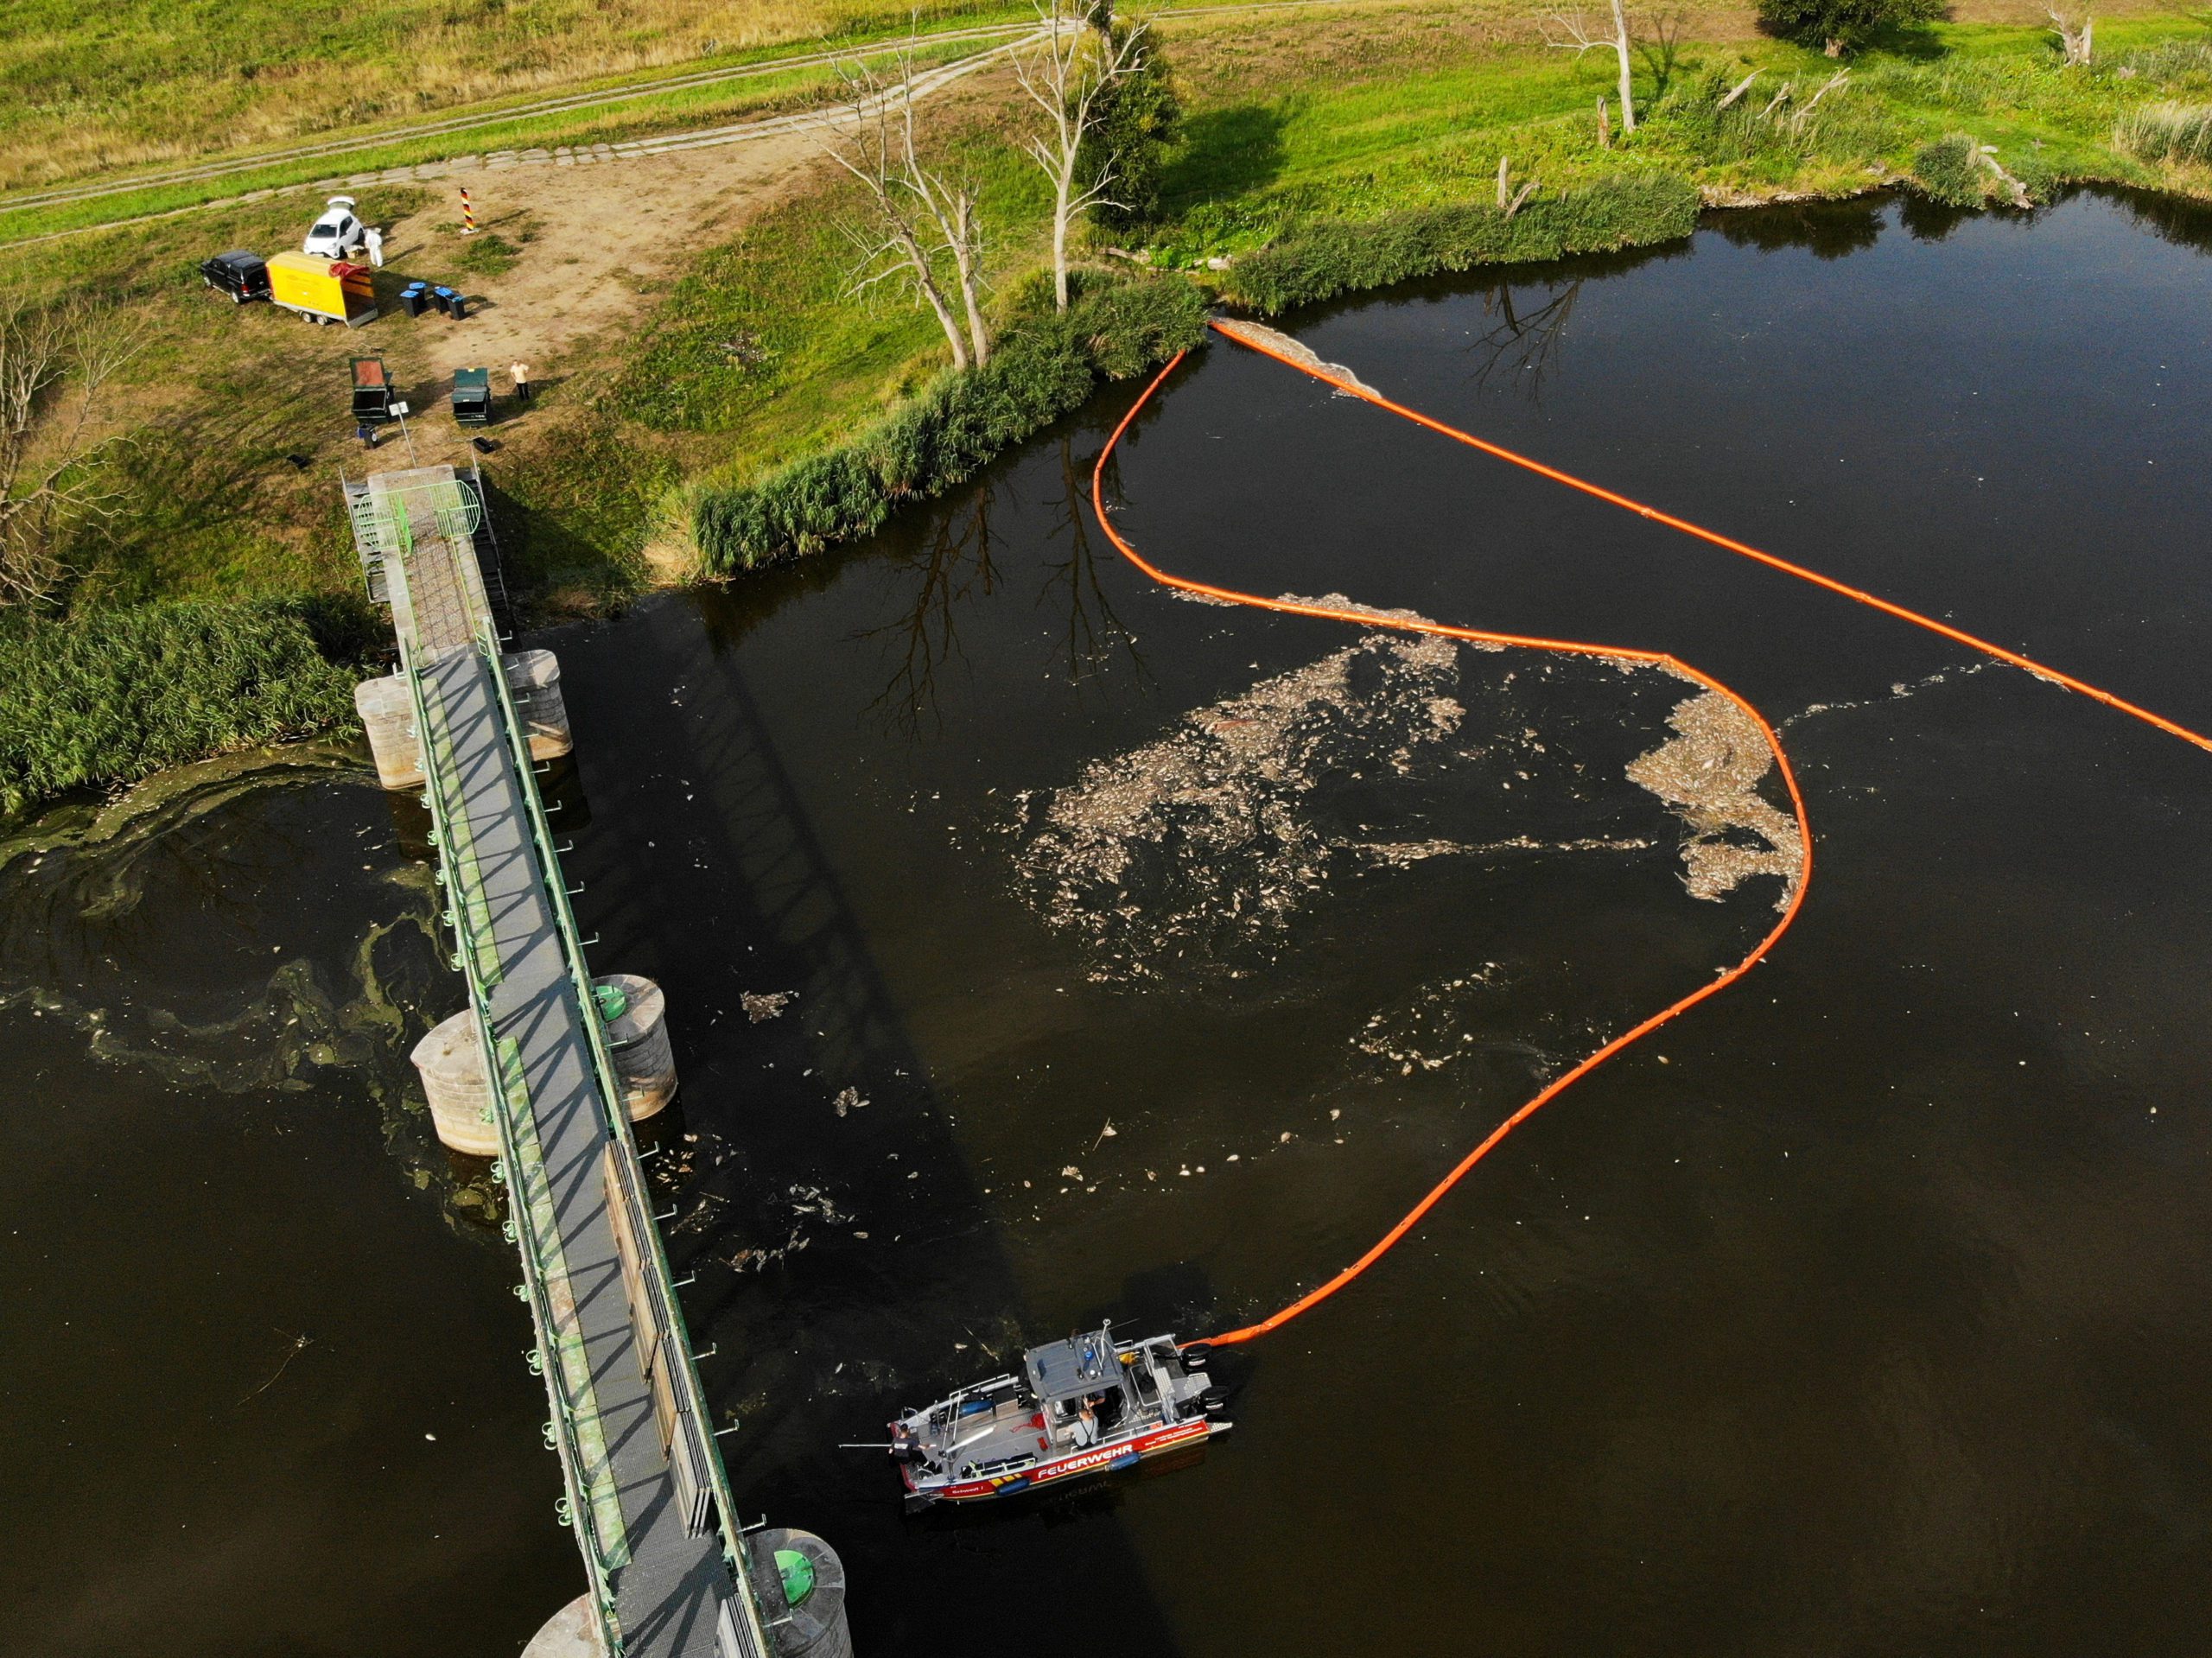 Fear For Future After Mass Die-Off Of Fish In Poland’s Oder River